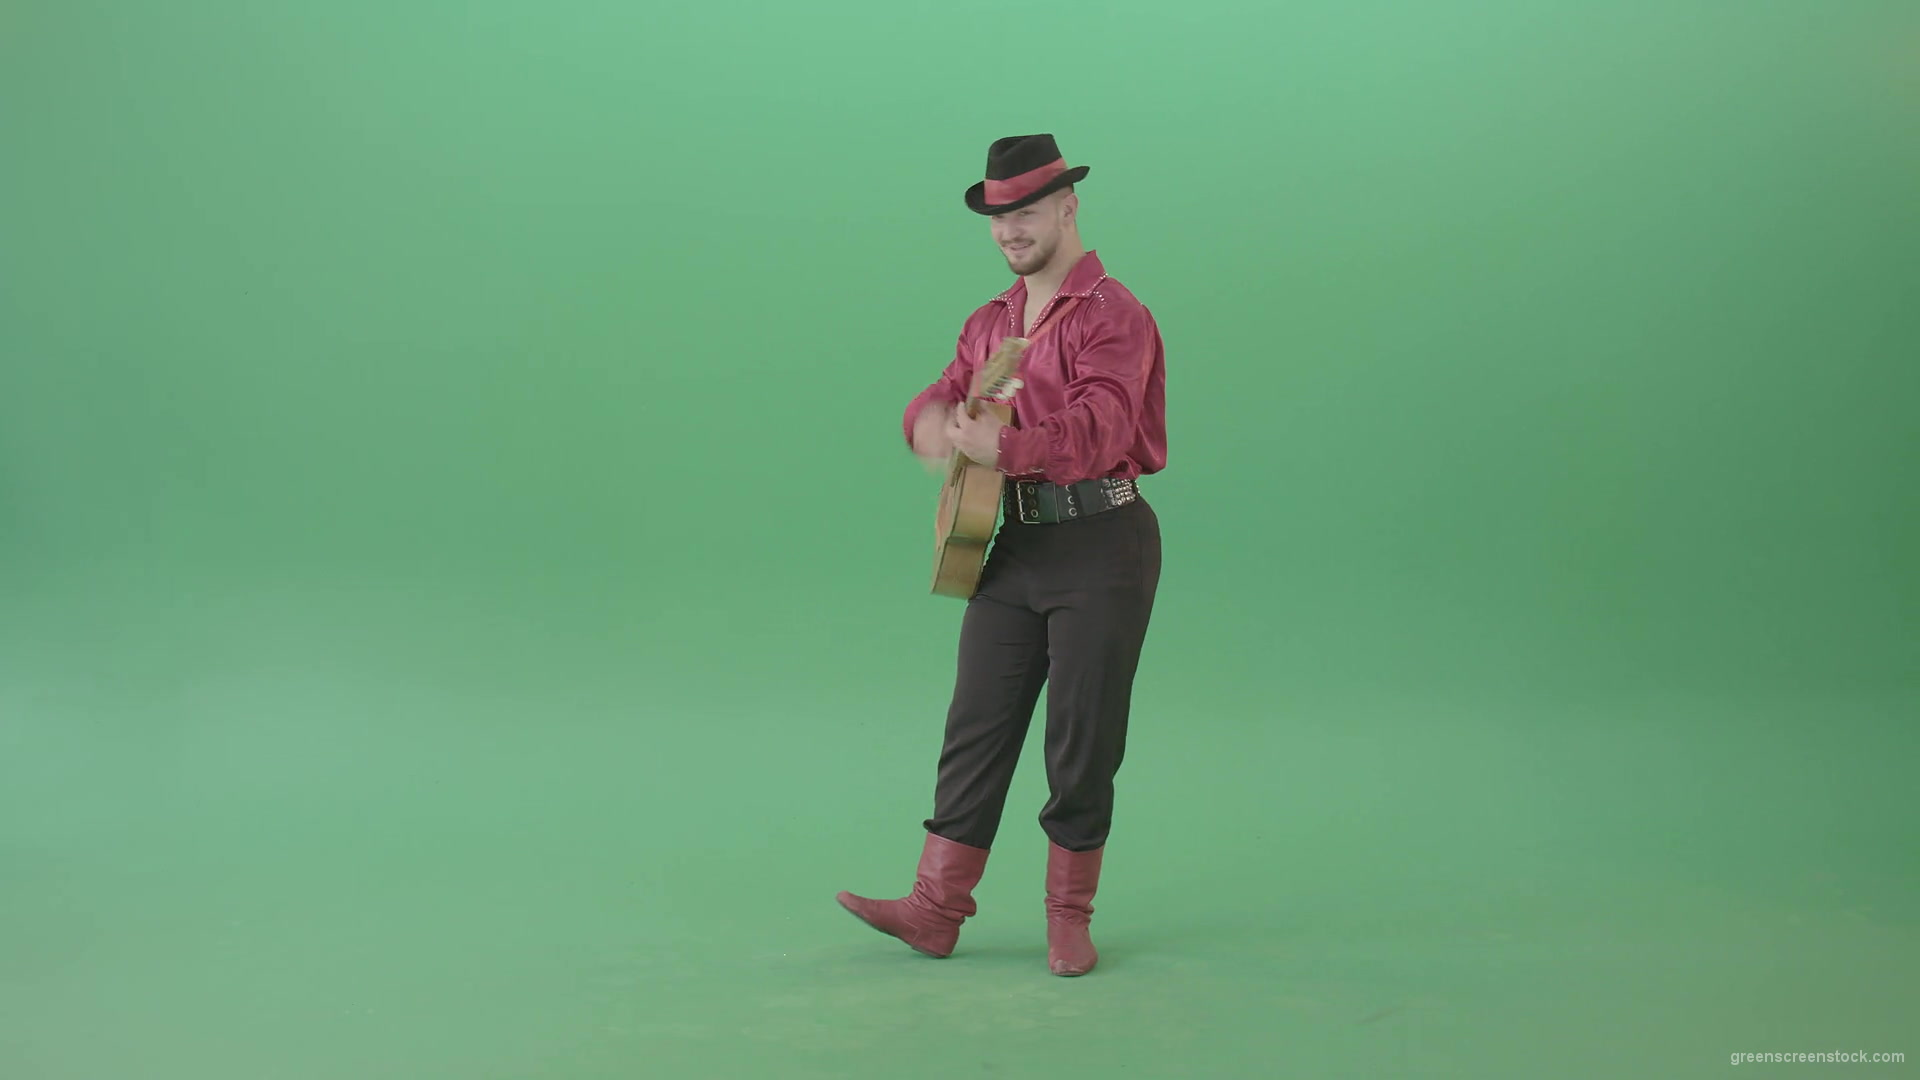 Balkan-Gipsy-man-in-red-shirt-playing-guitar-isolated-on-green-screen-4K-Video-Footage-1920_004 Green Screen Stock